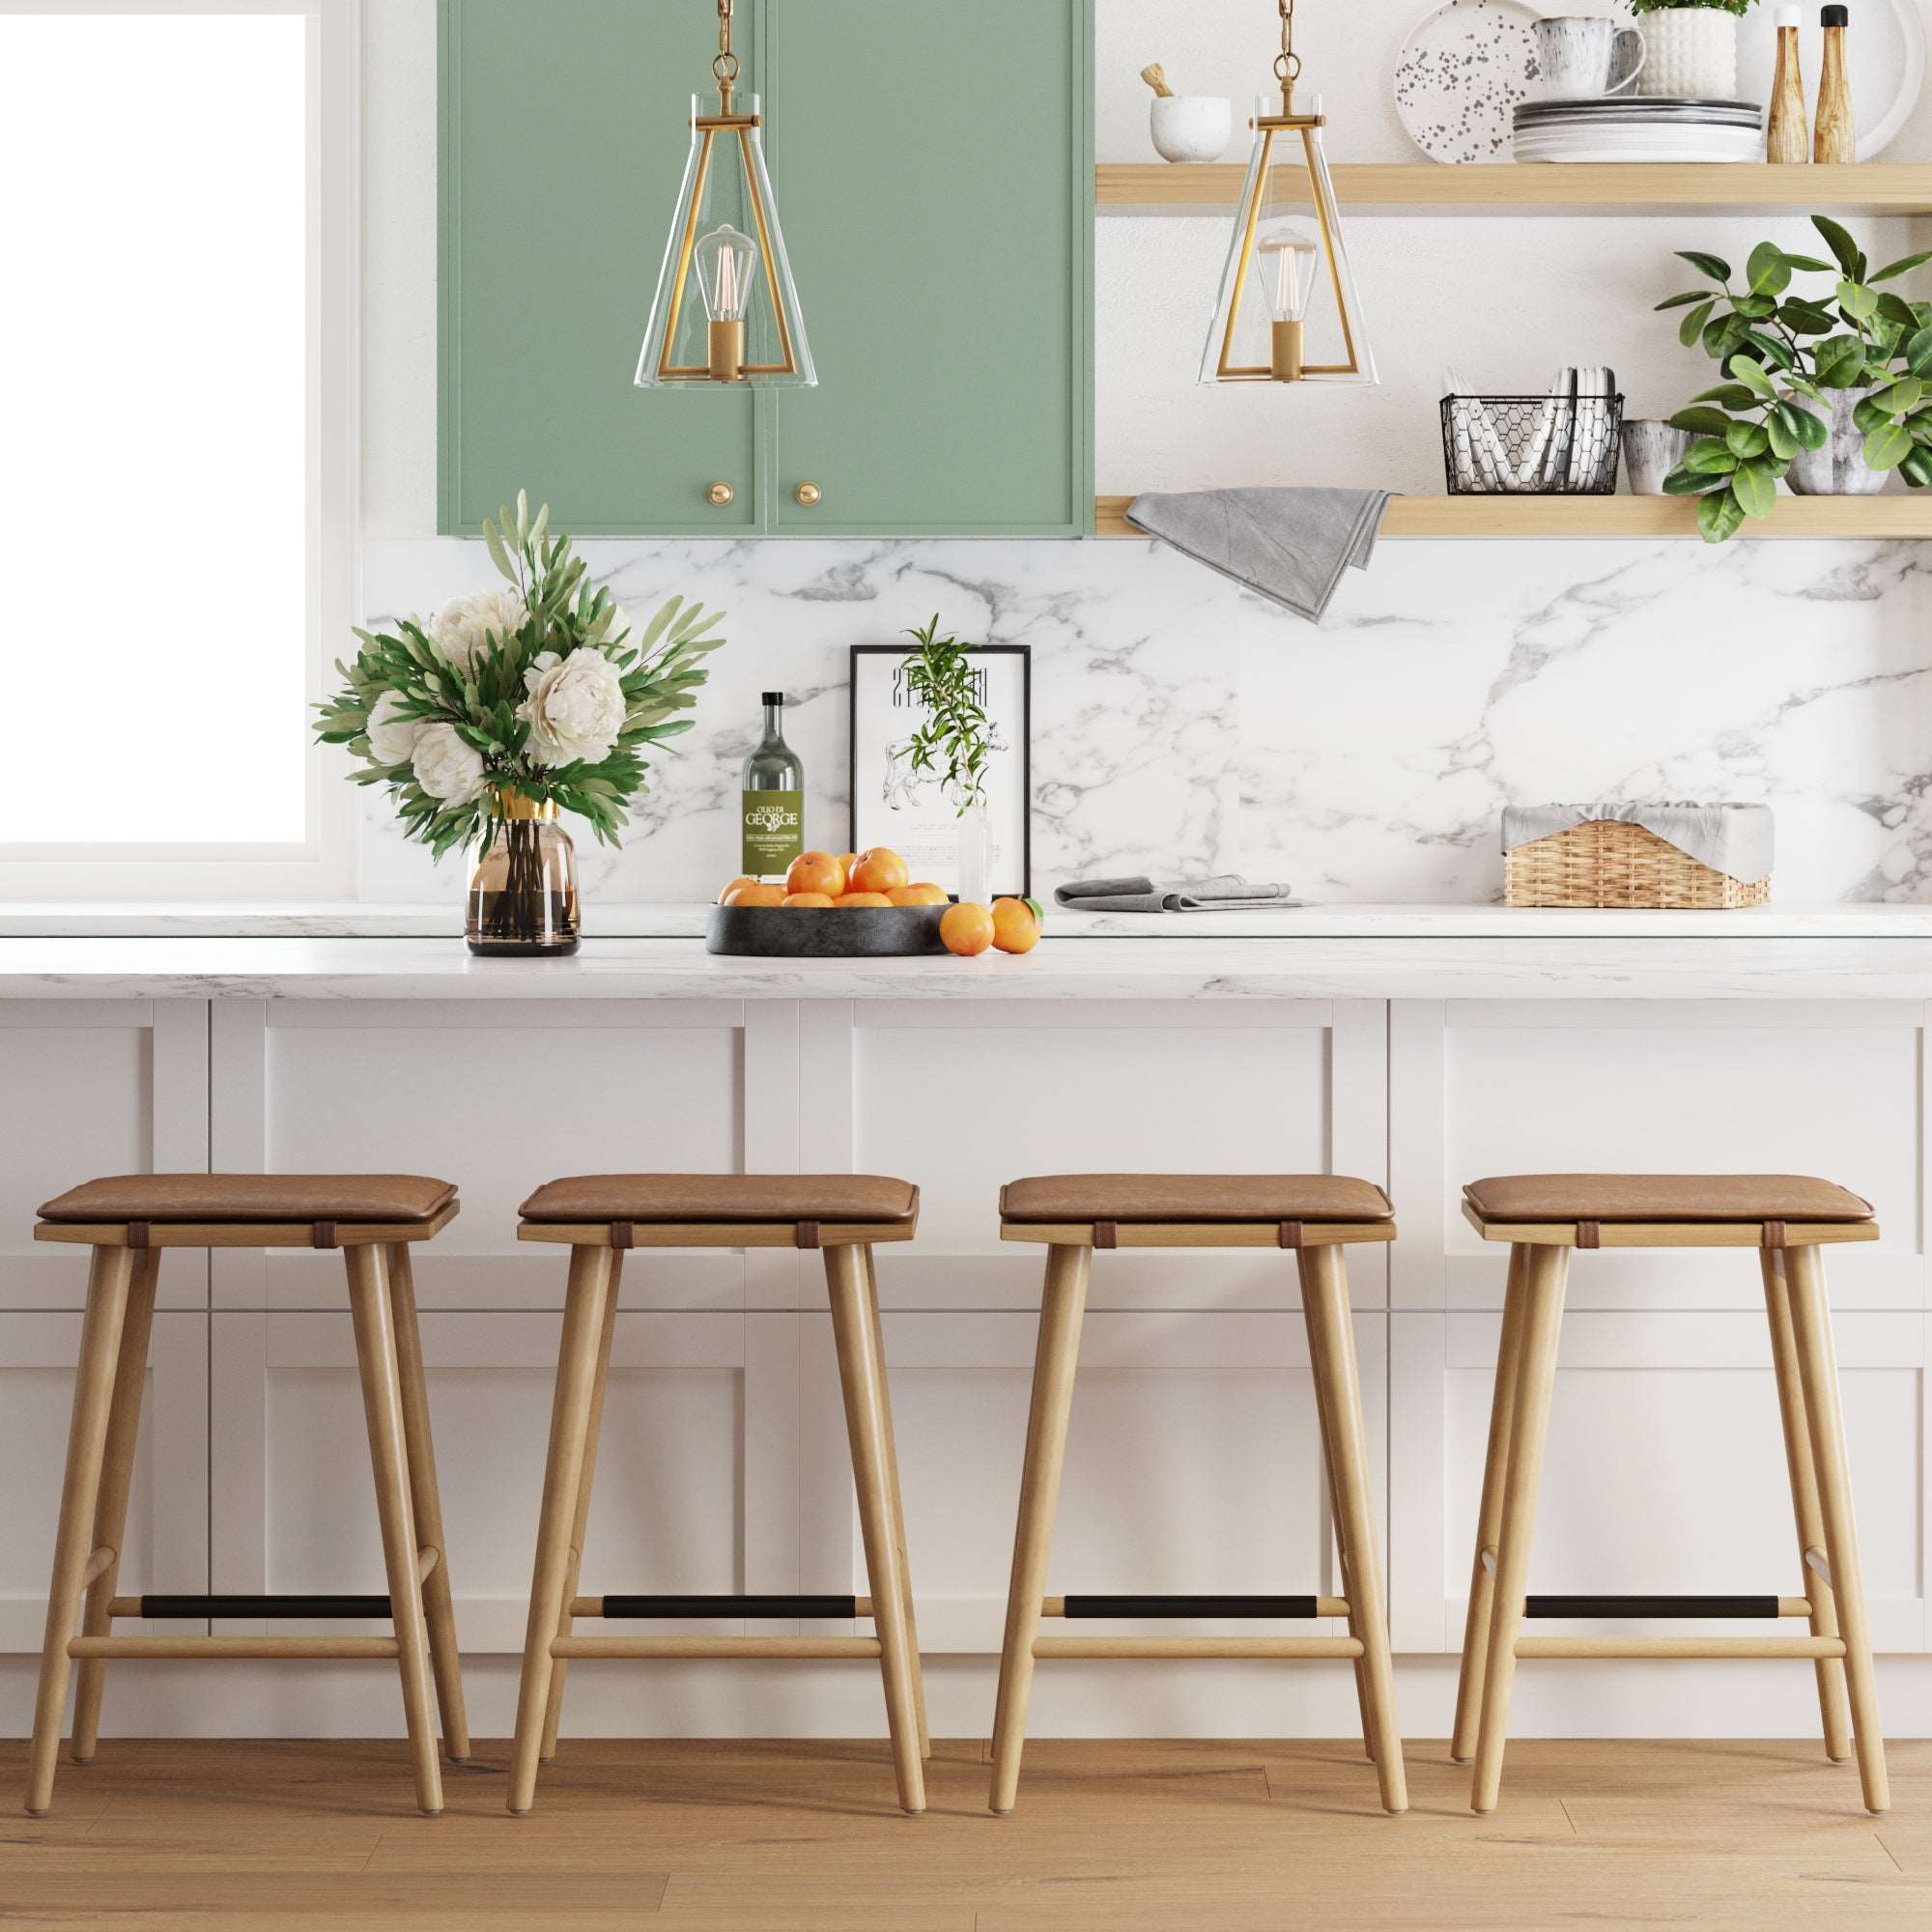 Wood Cushioned Counter Height Bar Stool